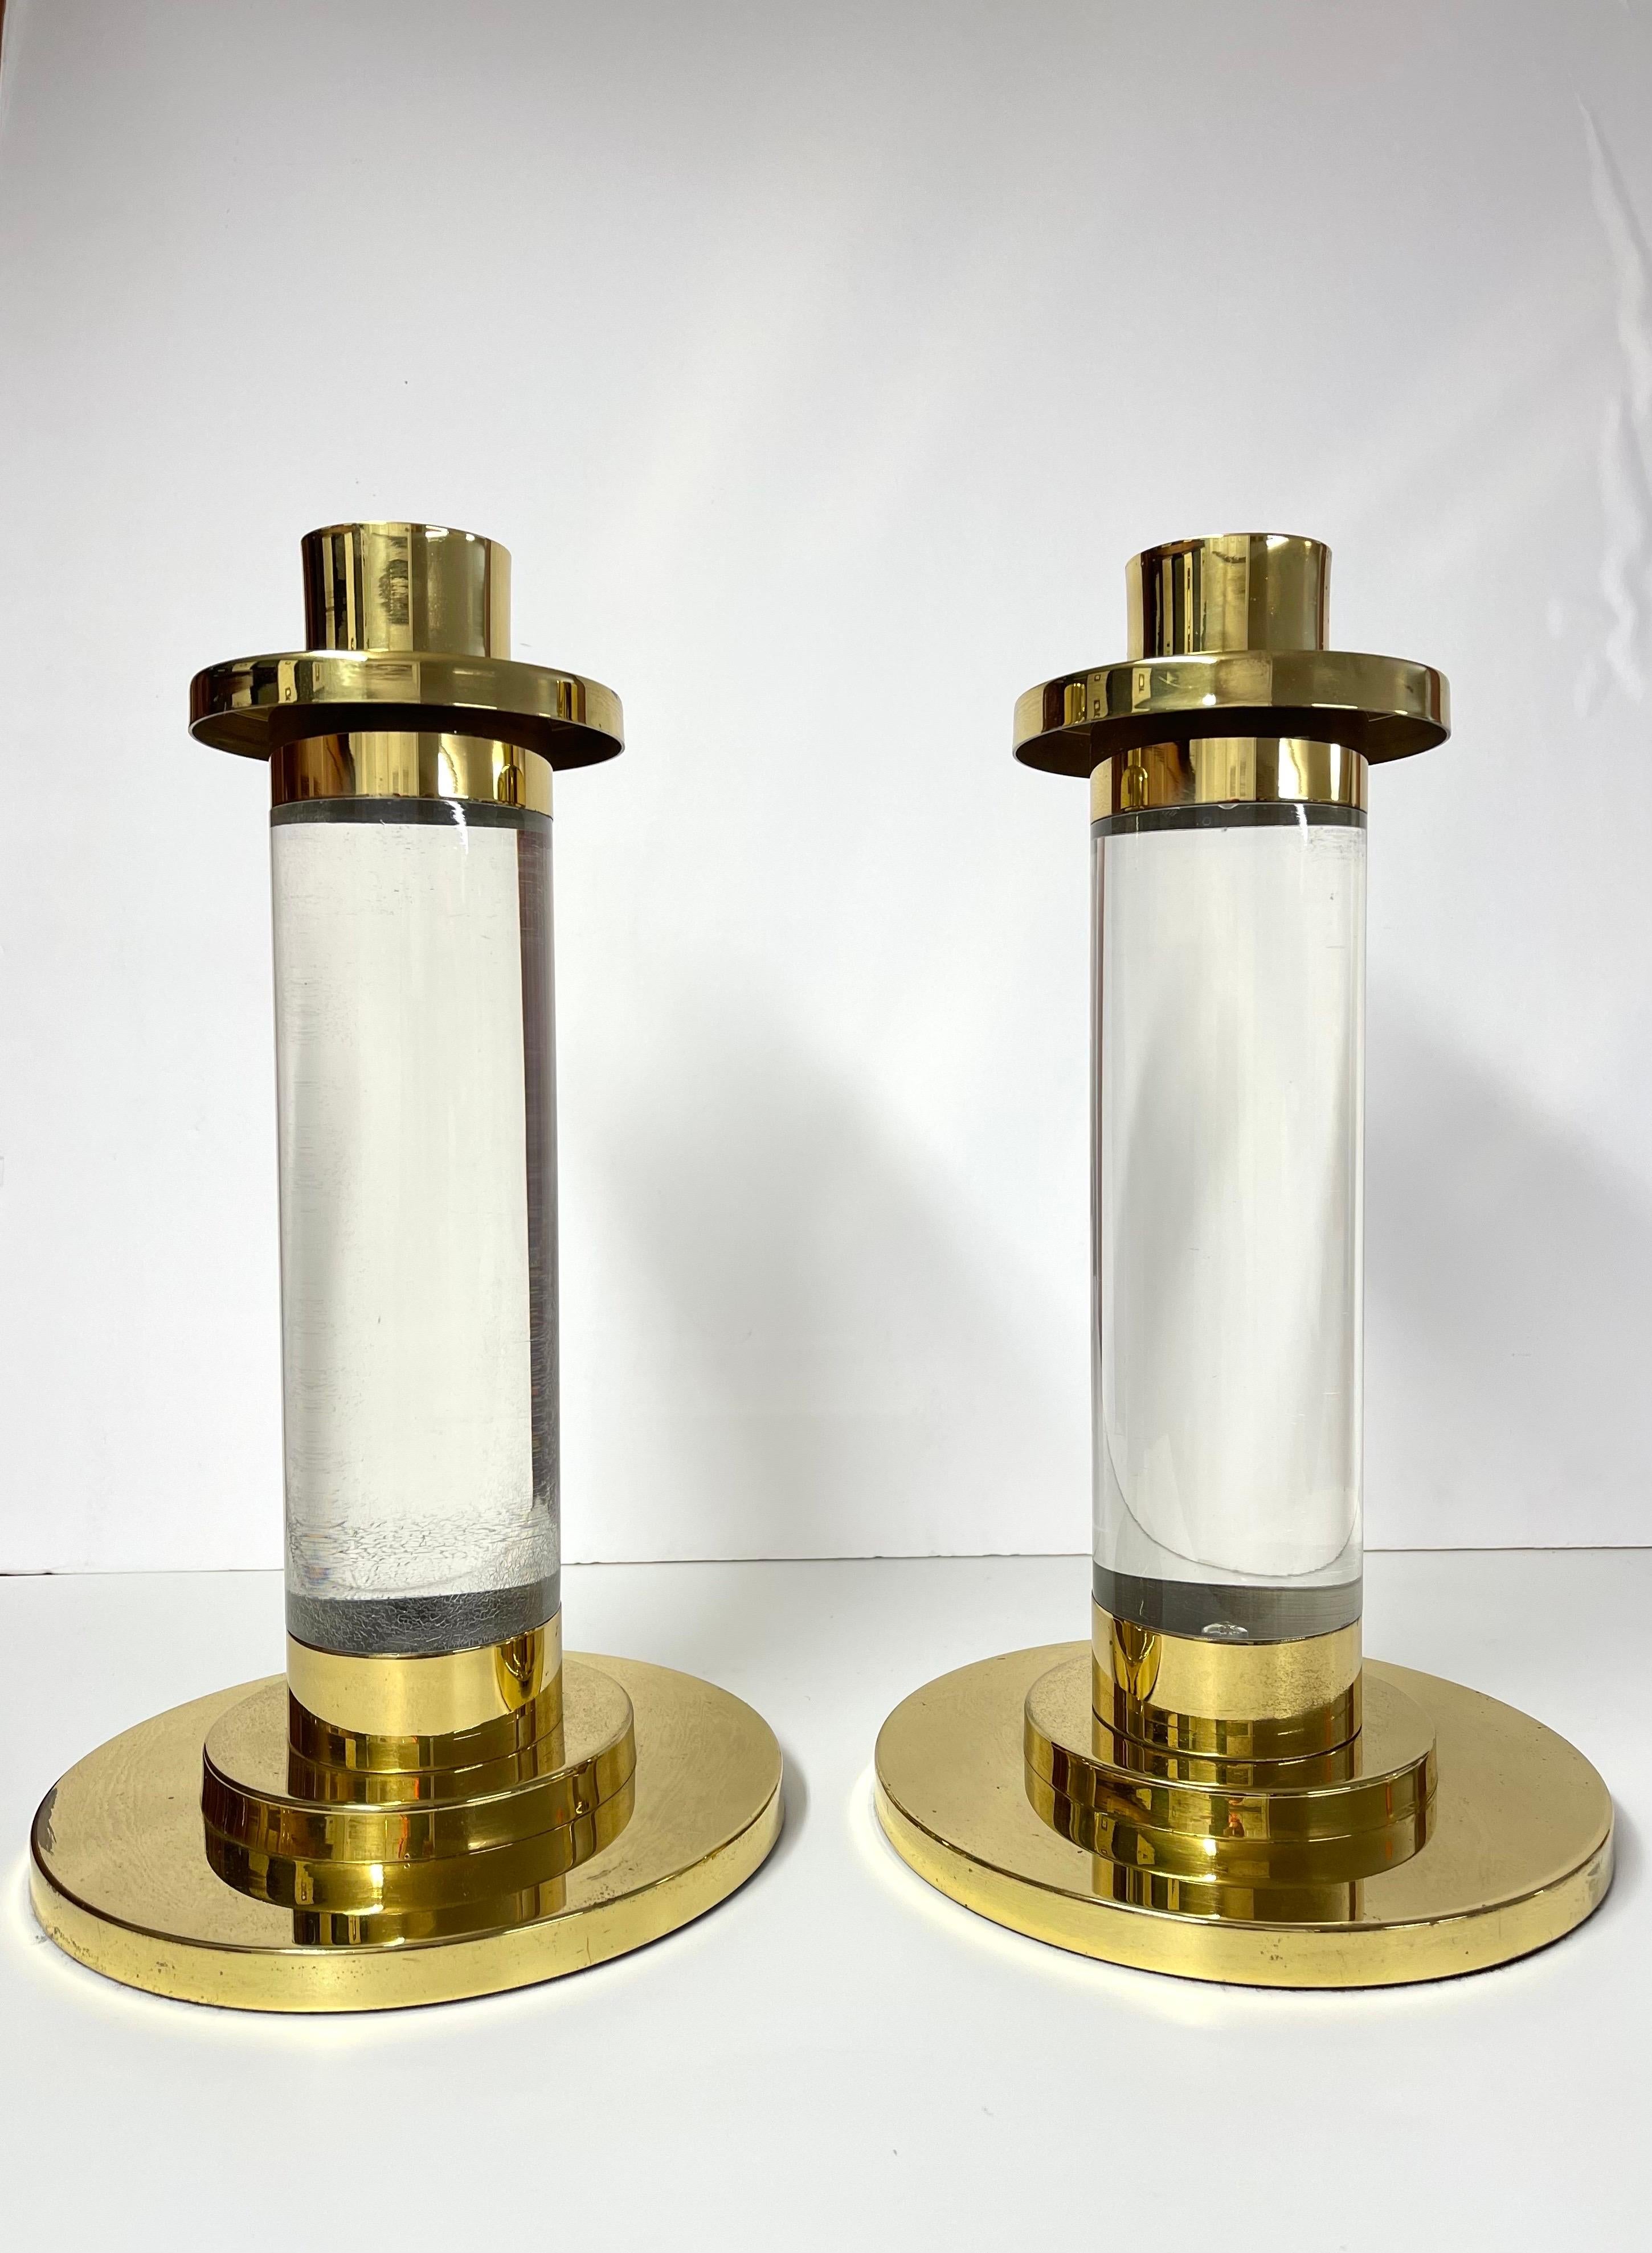 Pair of Lucite and Brass Column Candle Holders in the style of Karl Springer 
These are as Iconic as it gets. Classic and timeless pieces to accent any modern home.
